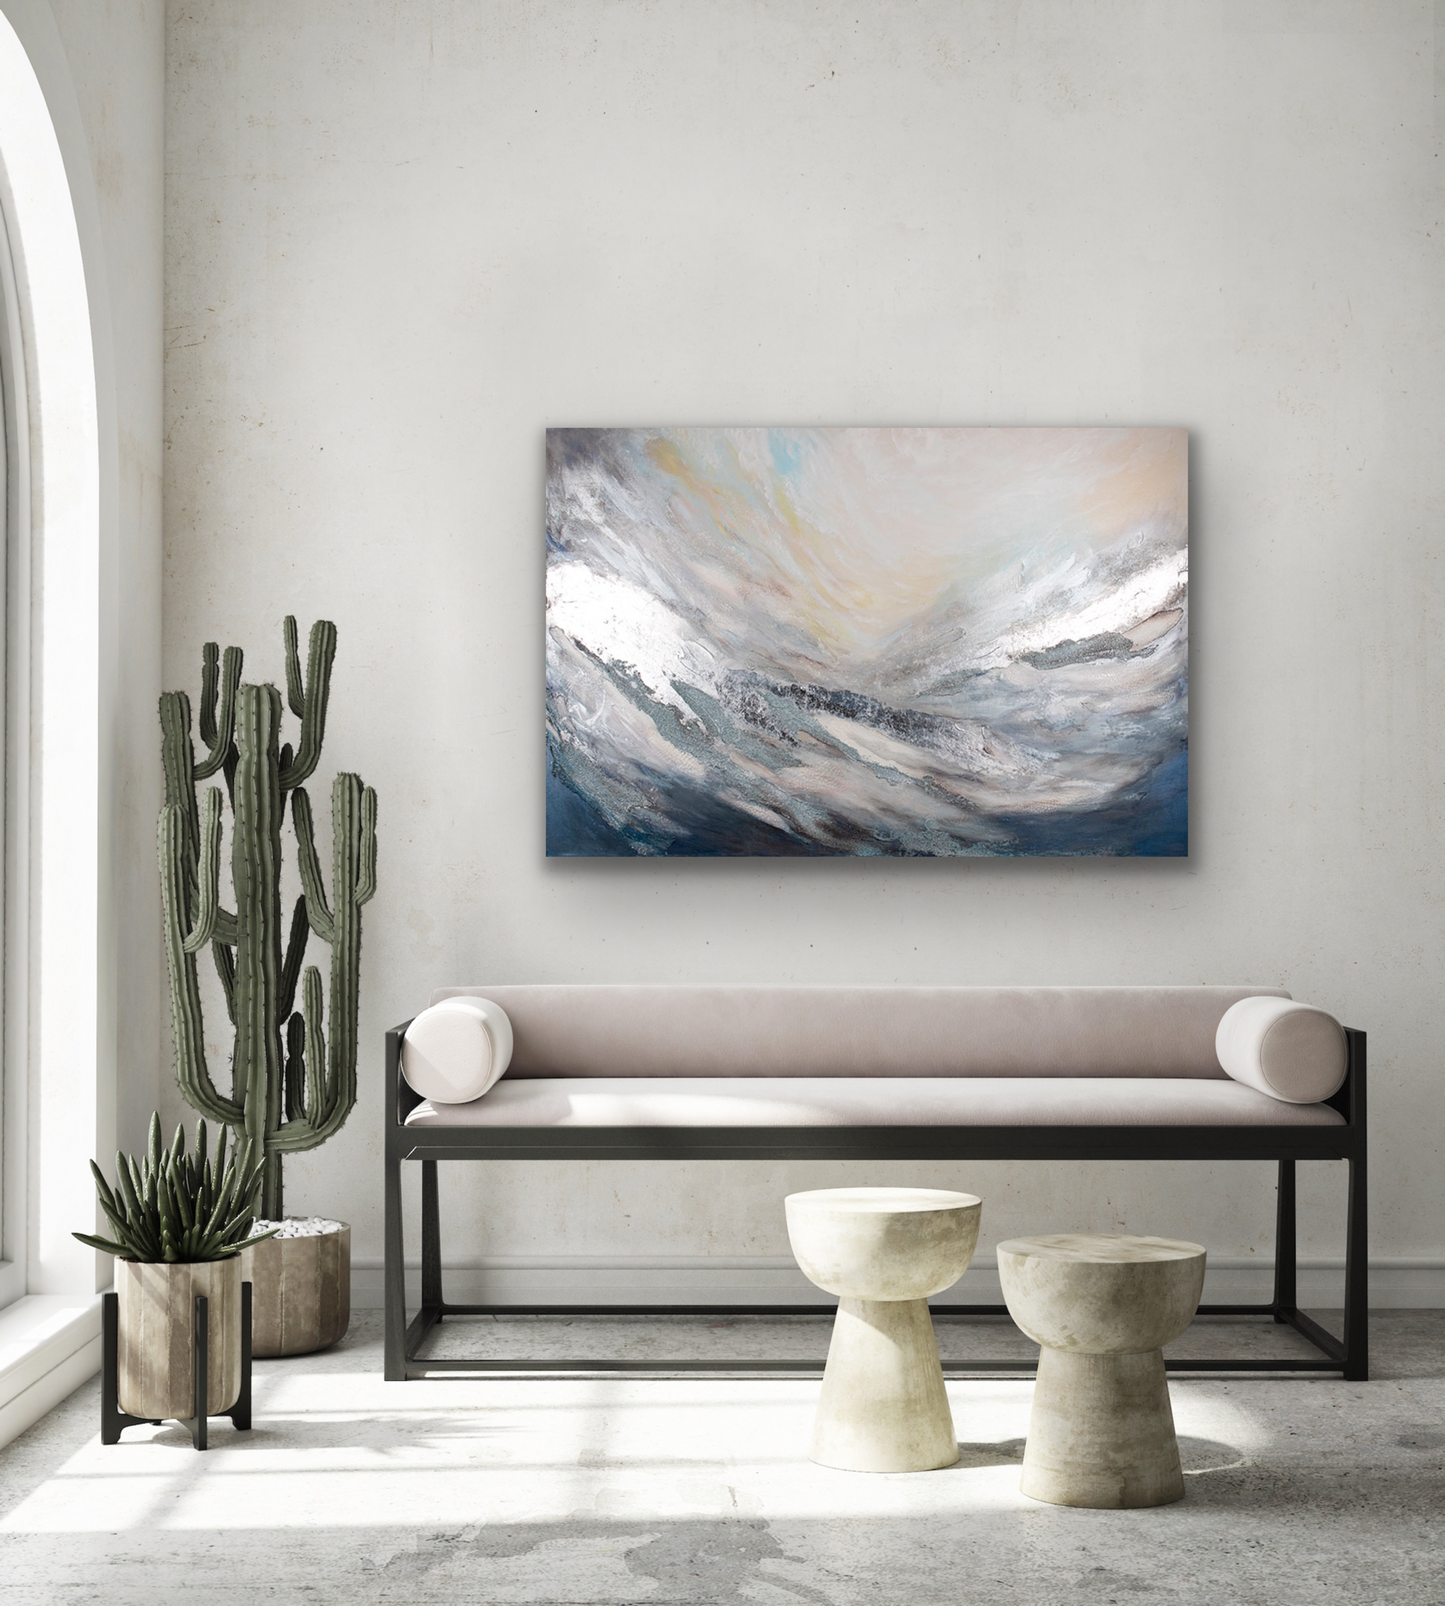 The attractive art piece will look great in your entrance way and comes in five different canvas print sizes to fit your wall perfectly.